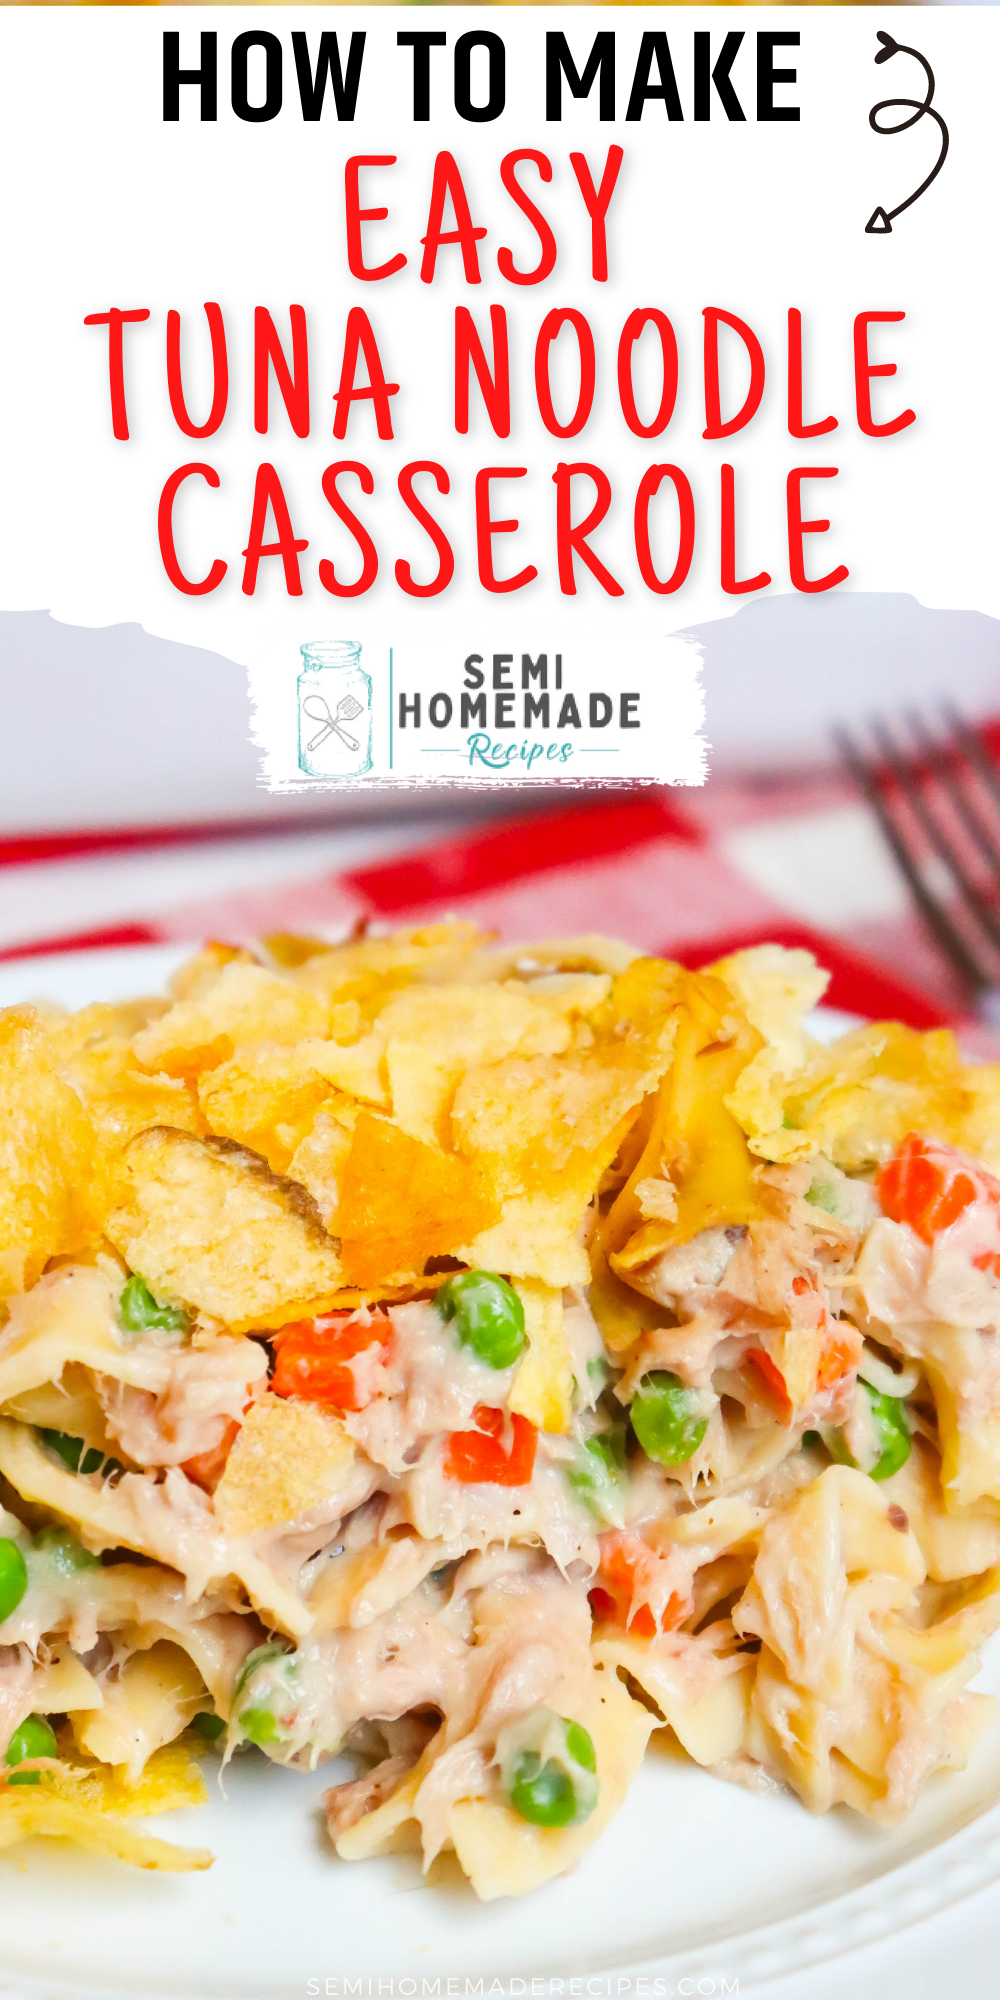 Easy Tuna Noodle Casserole - a classic favorite with egg noodles, lots of tuna, green peas, carrots and classic mushroom soup. We packed even more tuna into our casserole than the average tuna casserole so you get tuna in every bite! 